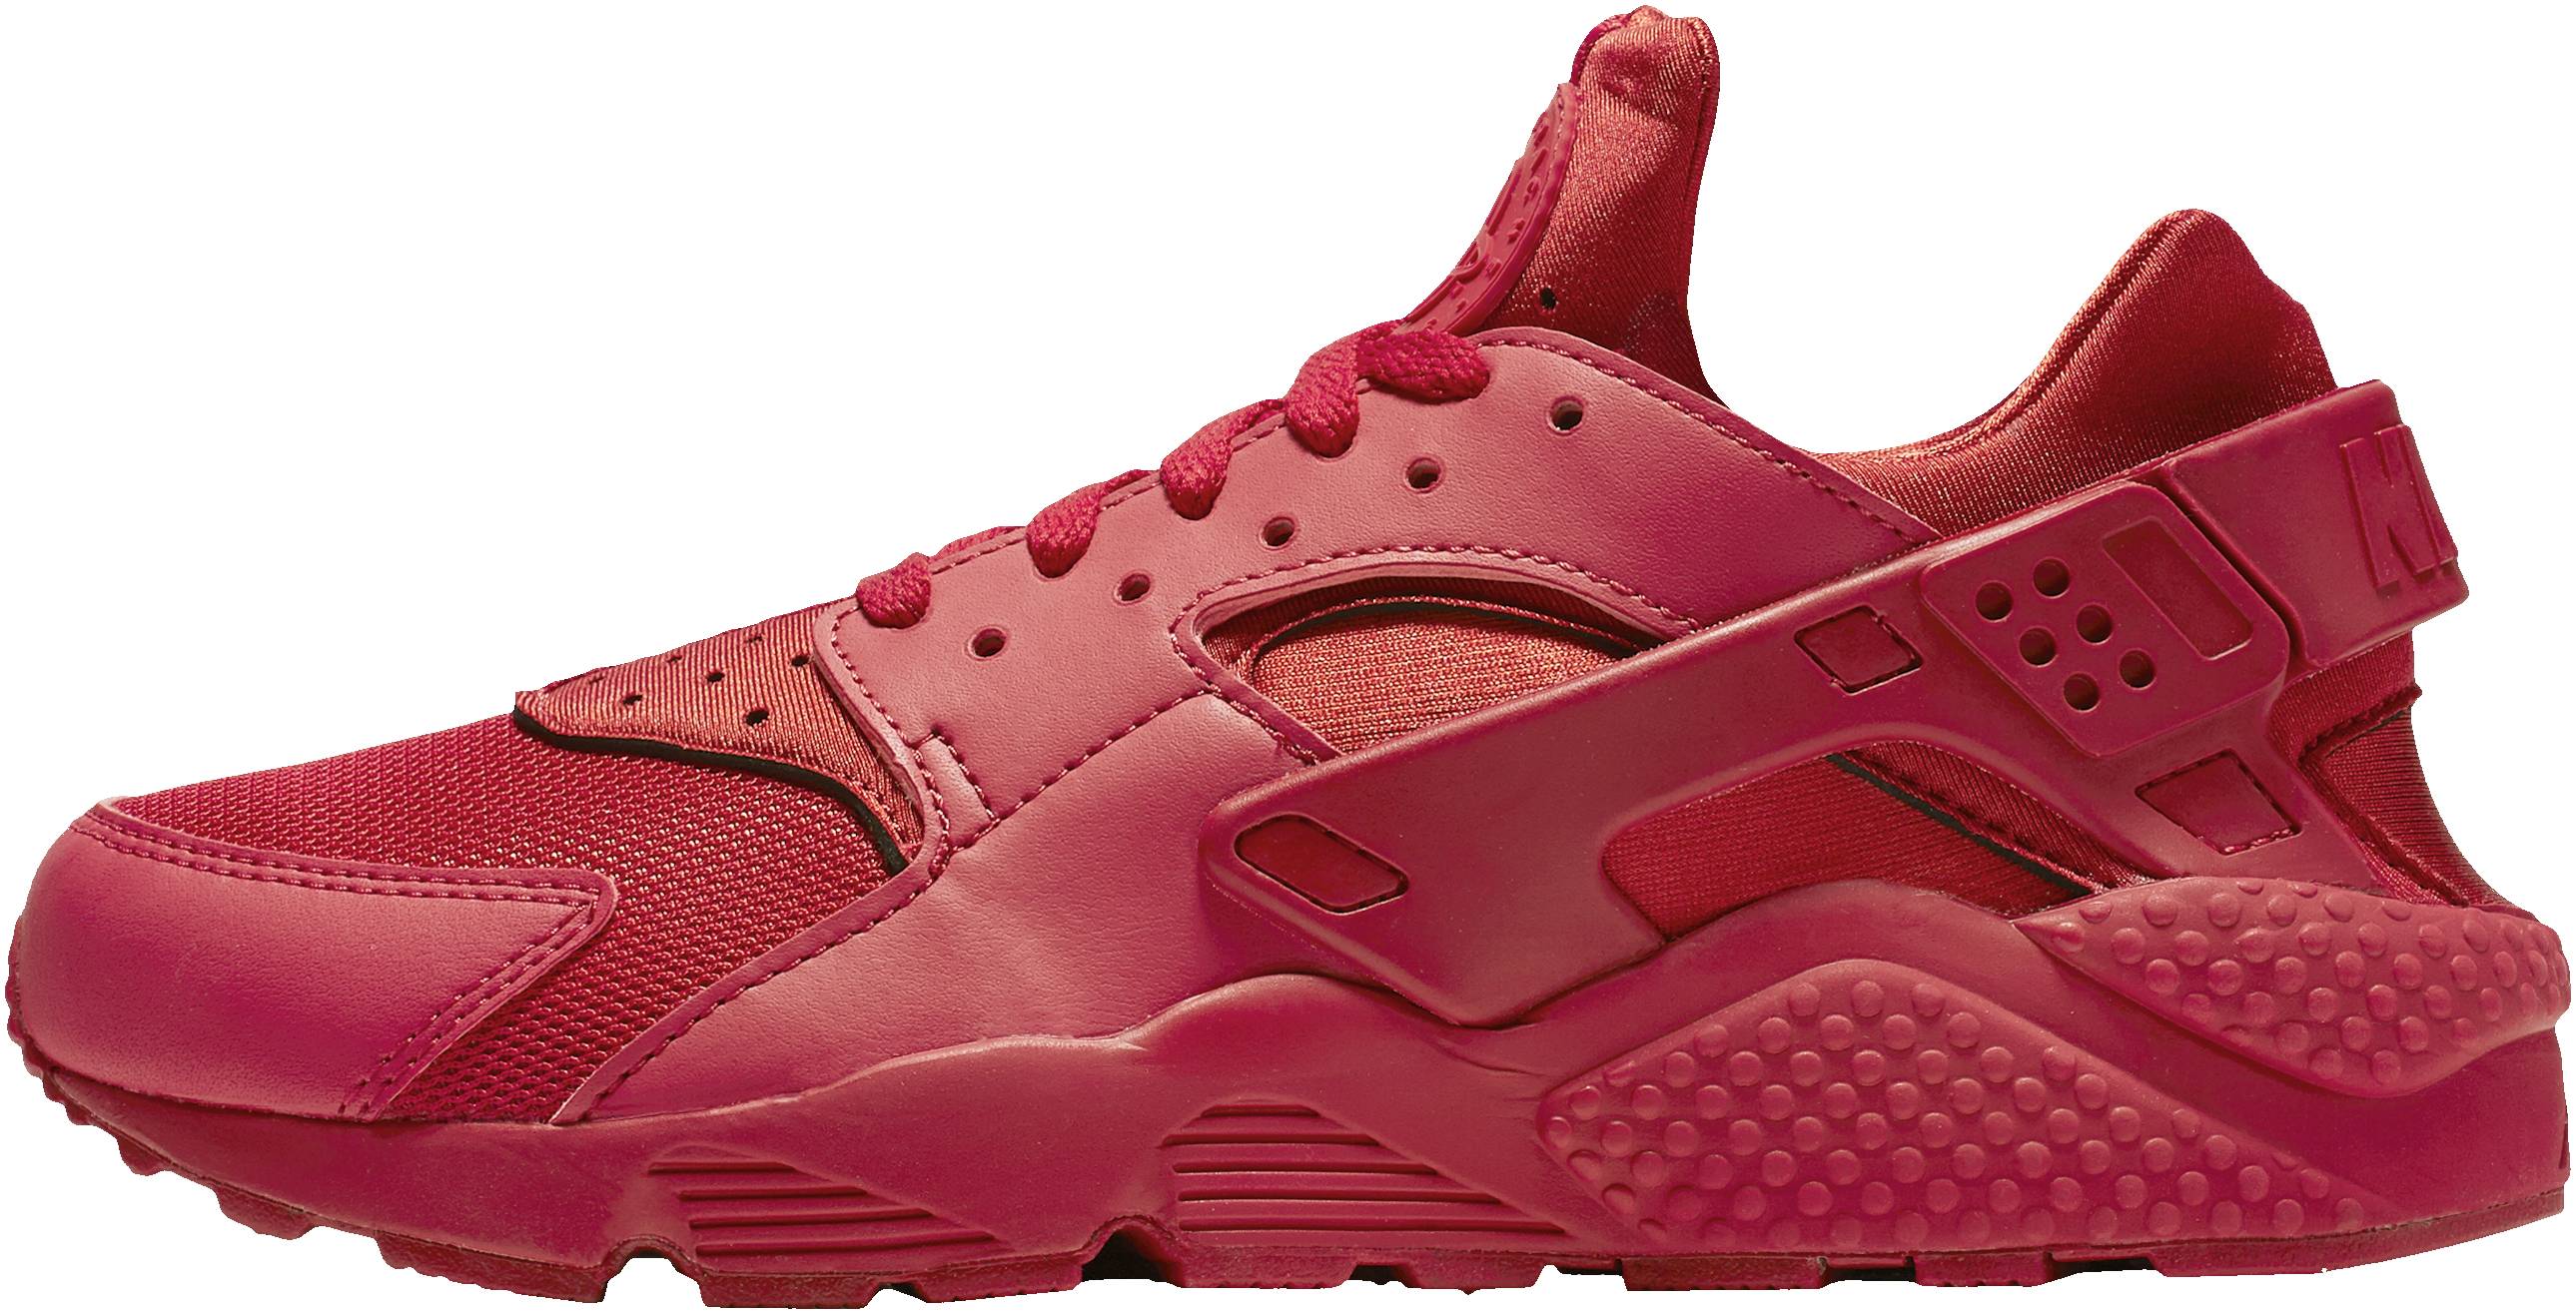 Save 29% on Red Nike Sneakers (95 